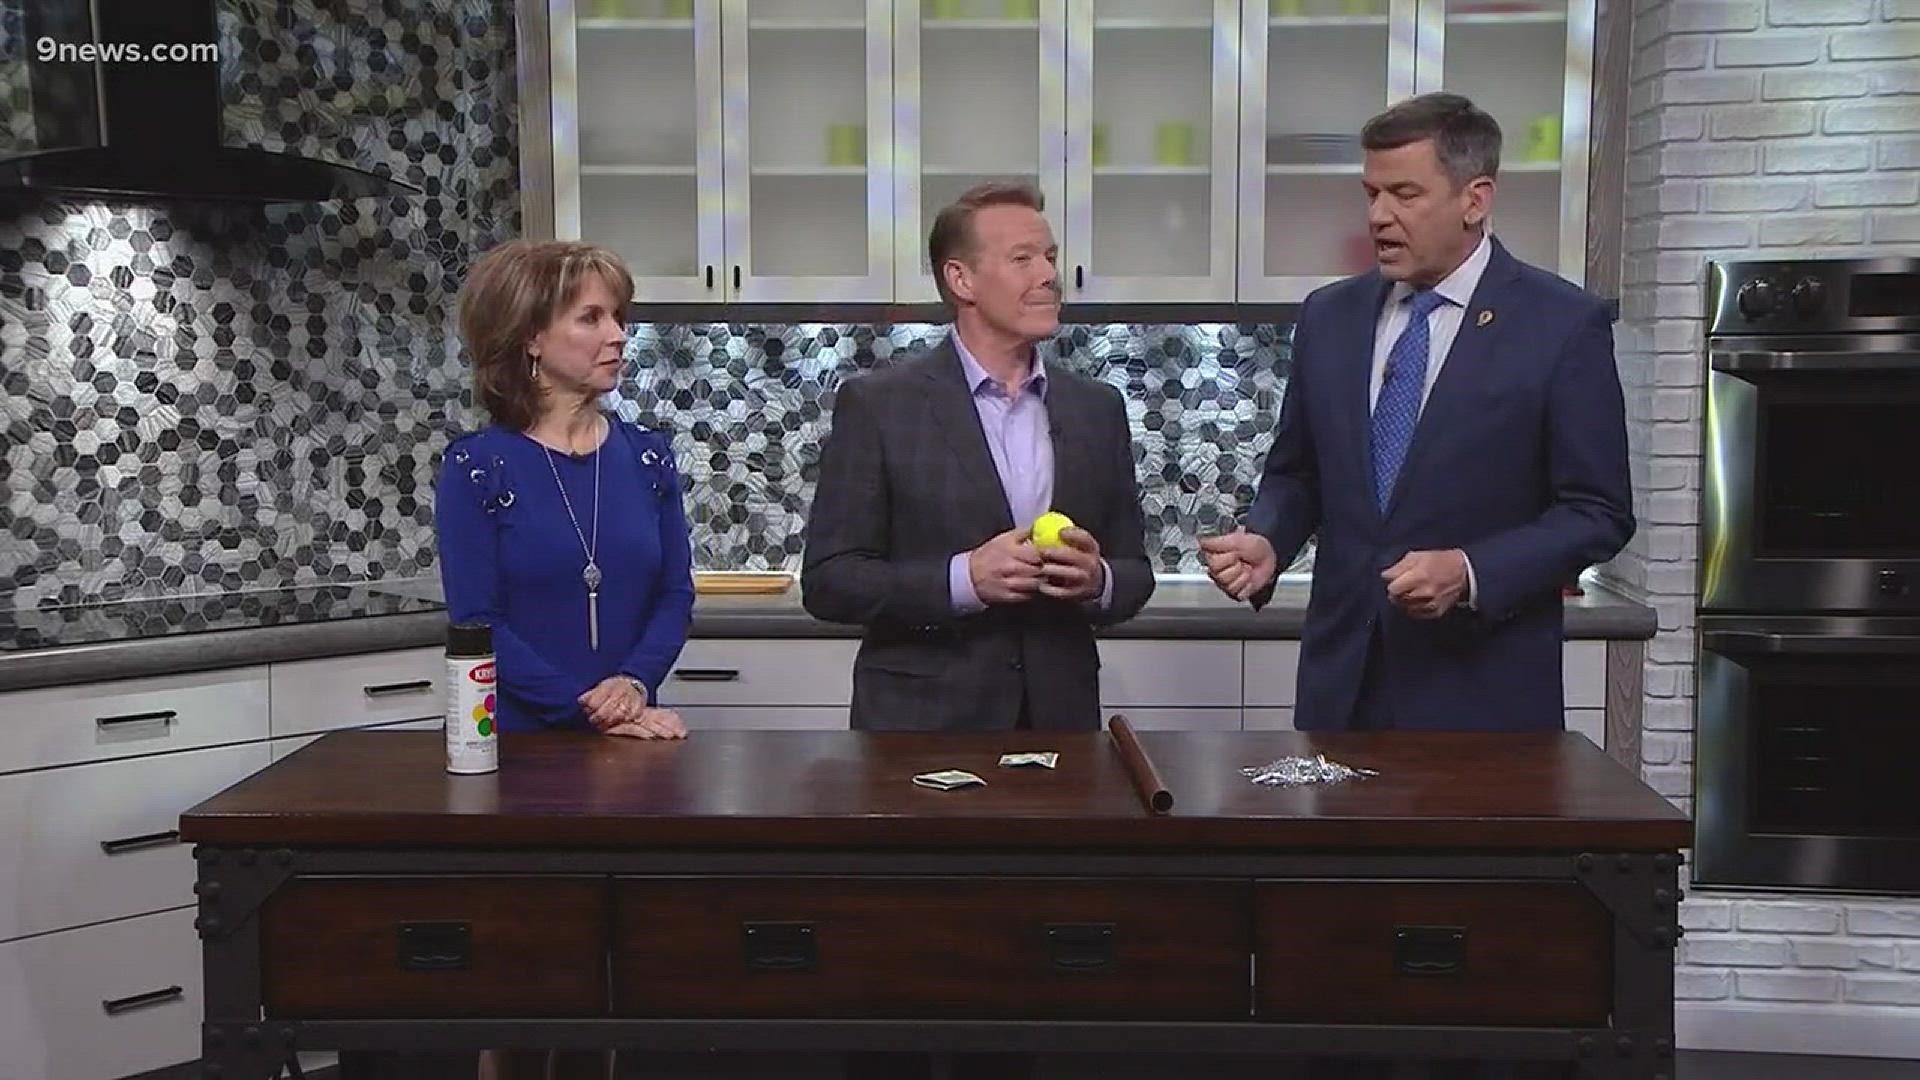 If the magnet on your refrigerator has lost some of its magnetic strength, don’t worry. Our science guy Steve Spangler joined us with a look at the world’s strongest magnets and how you can use them to stick Tom Green to the refrigerator.